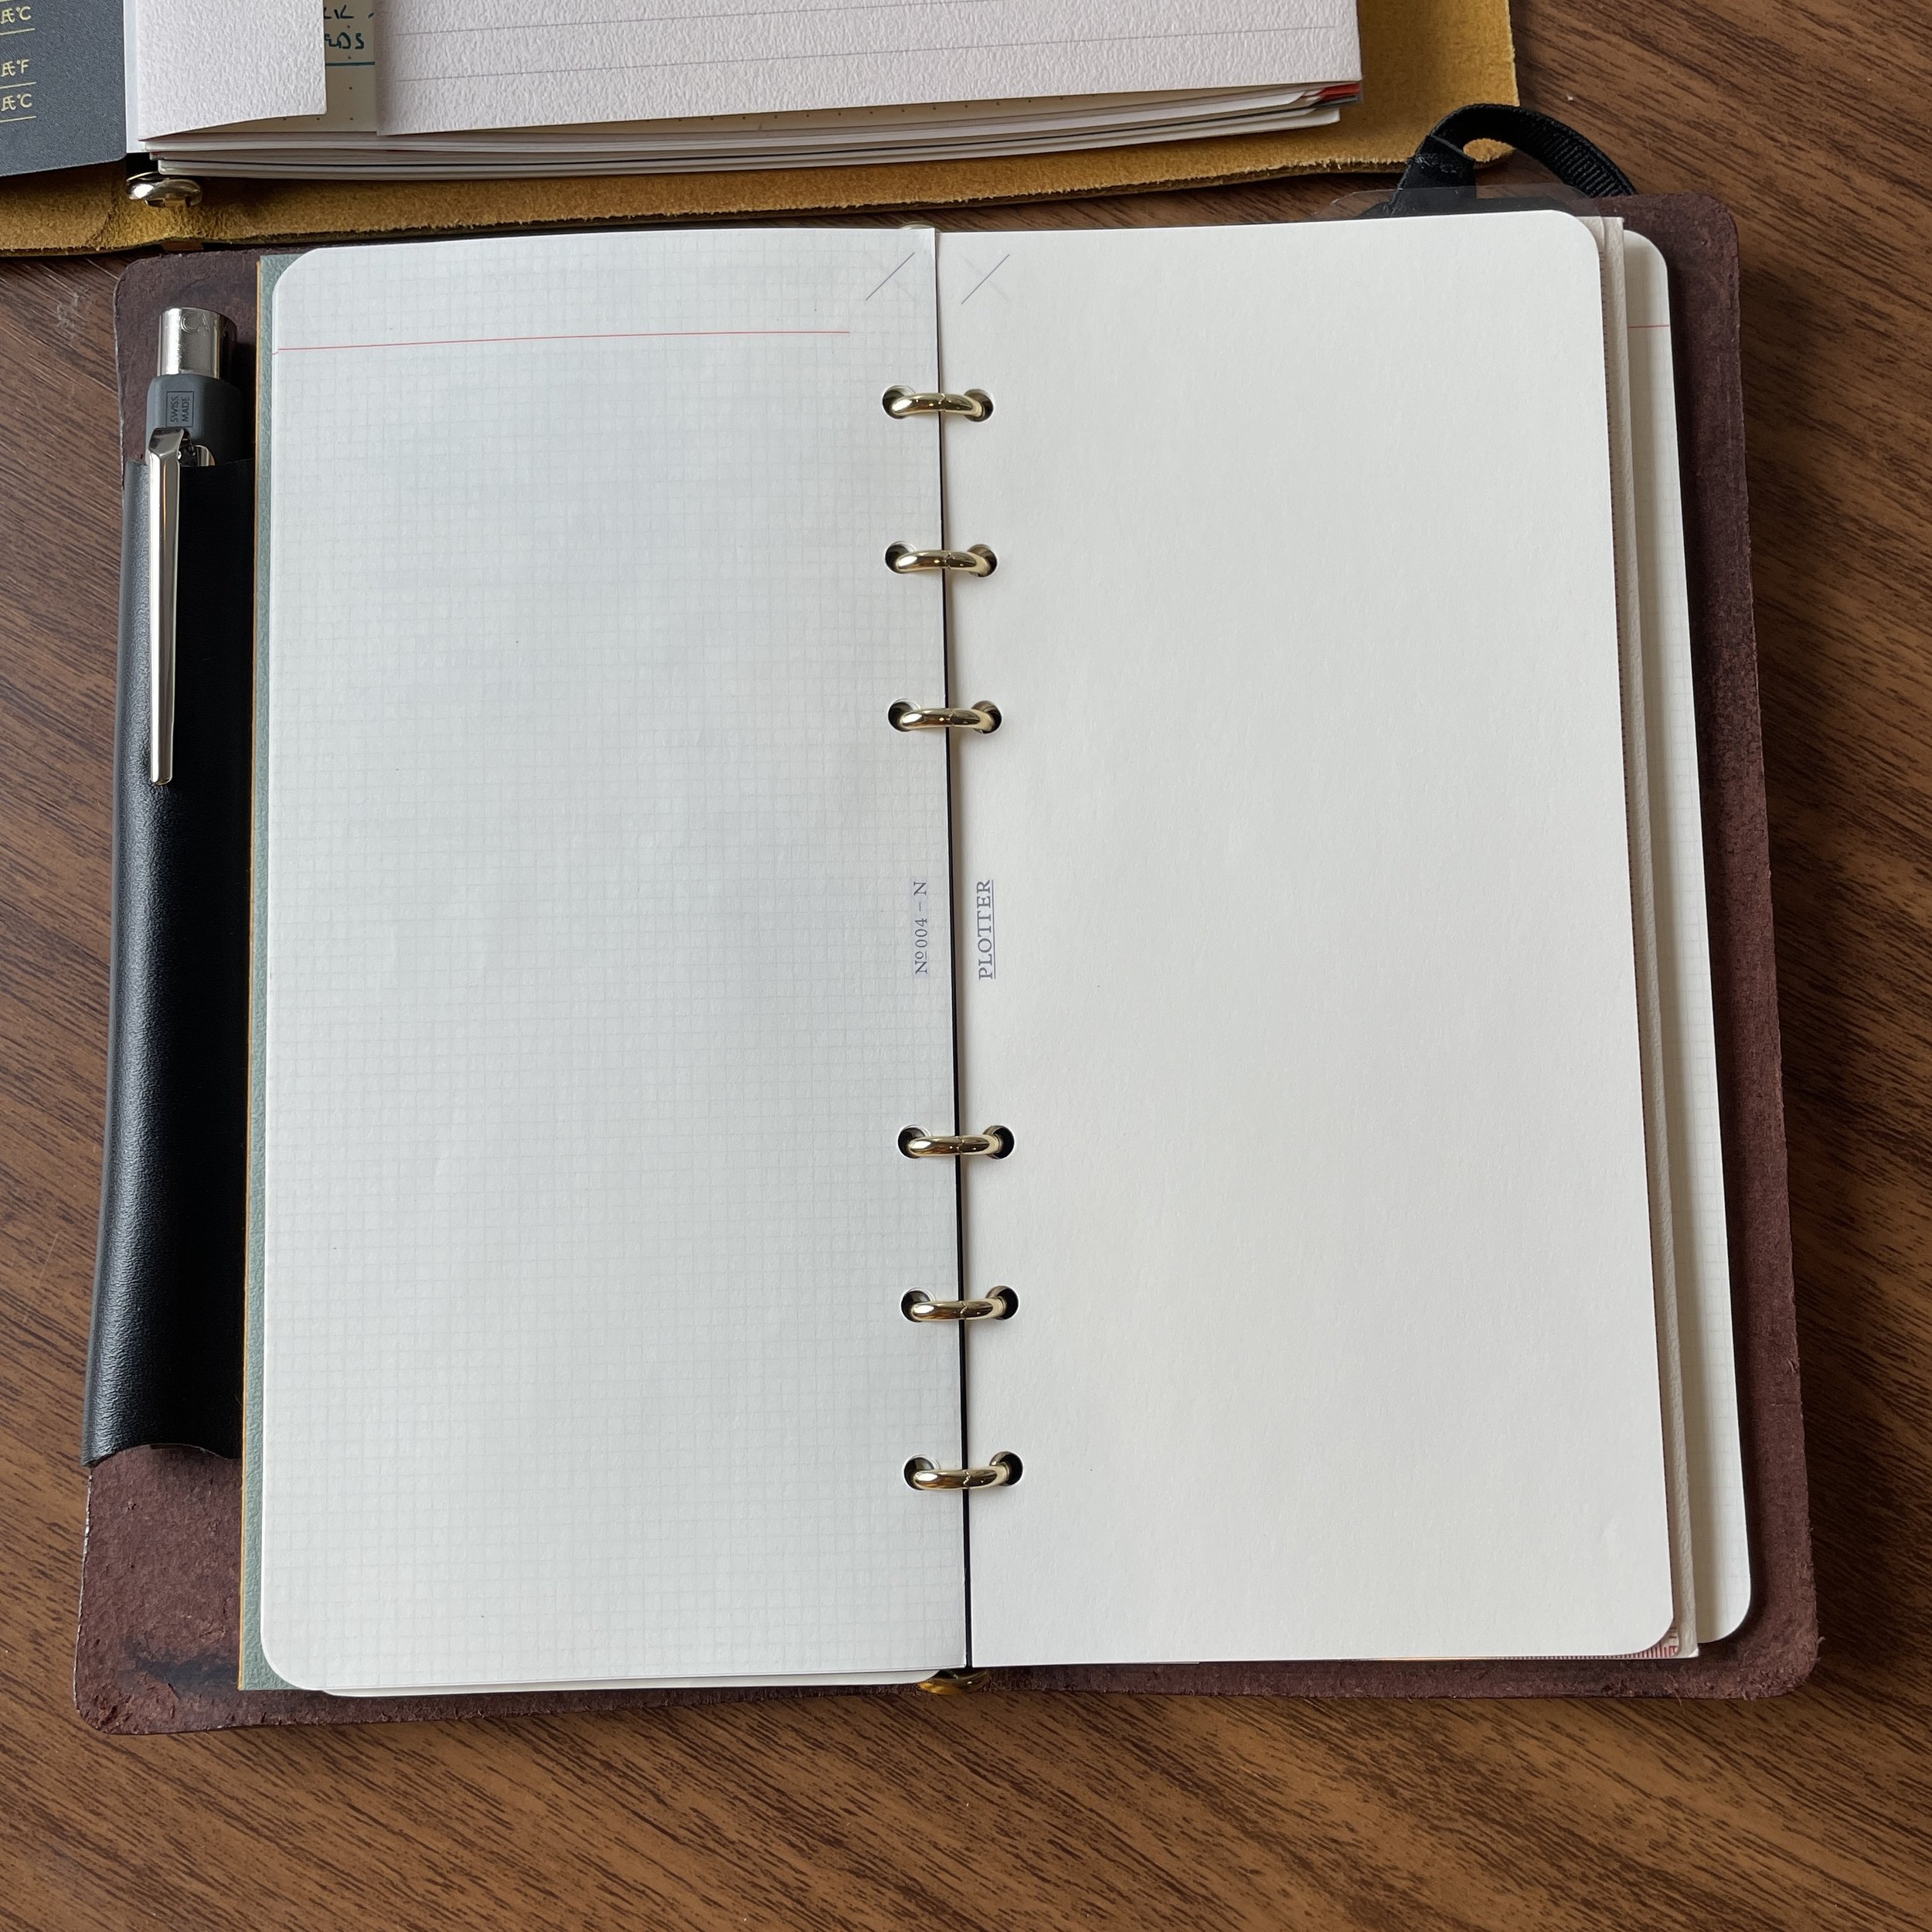 Antner A5 Binder PU Leather 6-Ring Notebook Binder Cover for A5 Filler  Paper, Refillable A5 Personal Planner Binder with Magnetic Buckle Closure,  Black : Amazon.in: Office Products